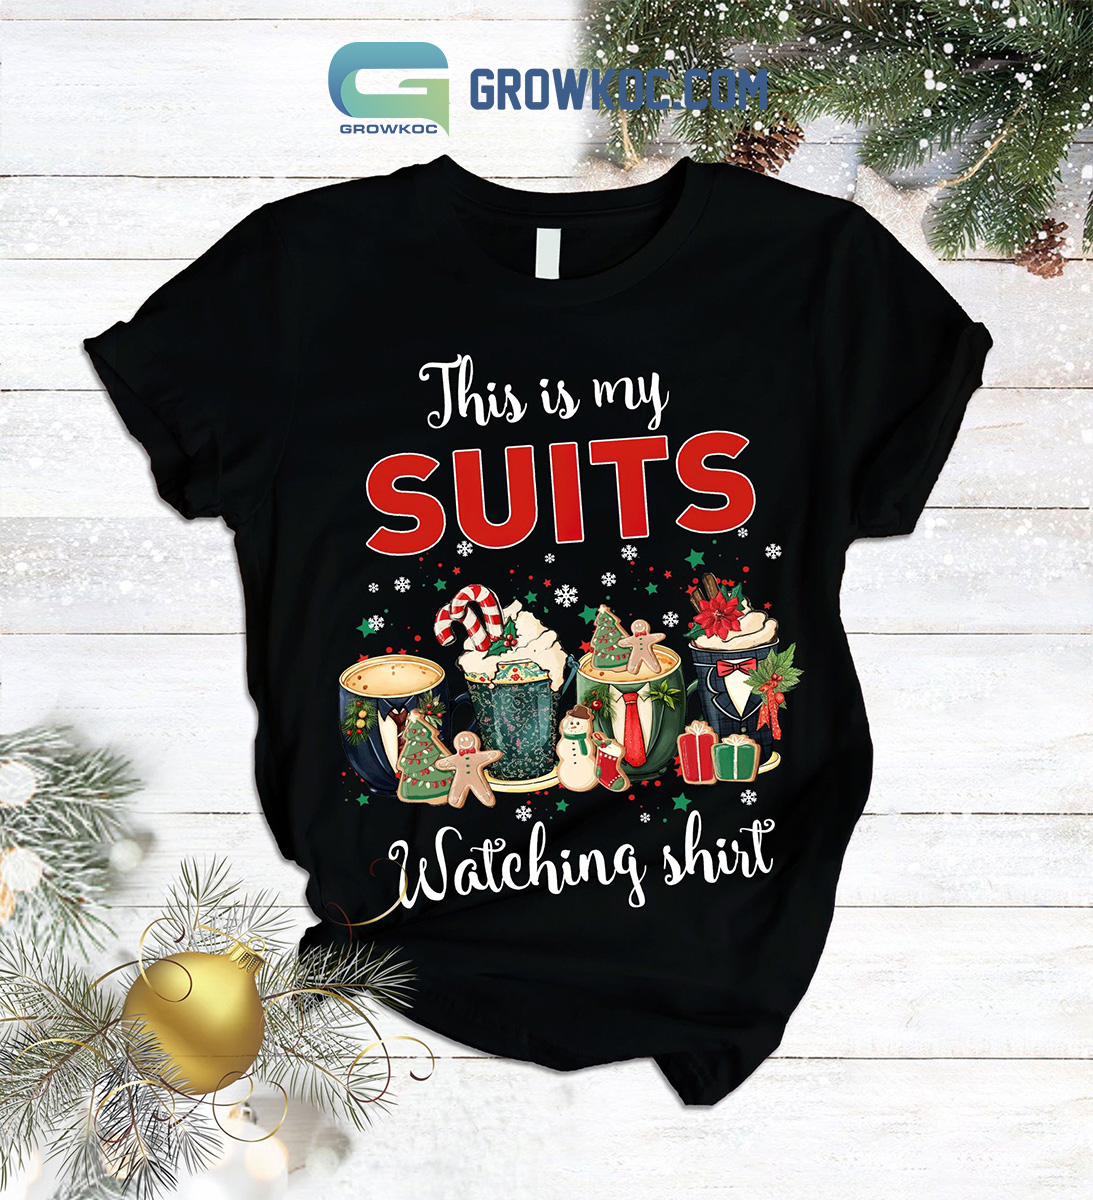 Pearson Specter Litt This Is My Suits Watching Shirt Christmas Pajamas Set